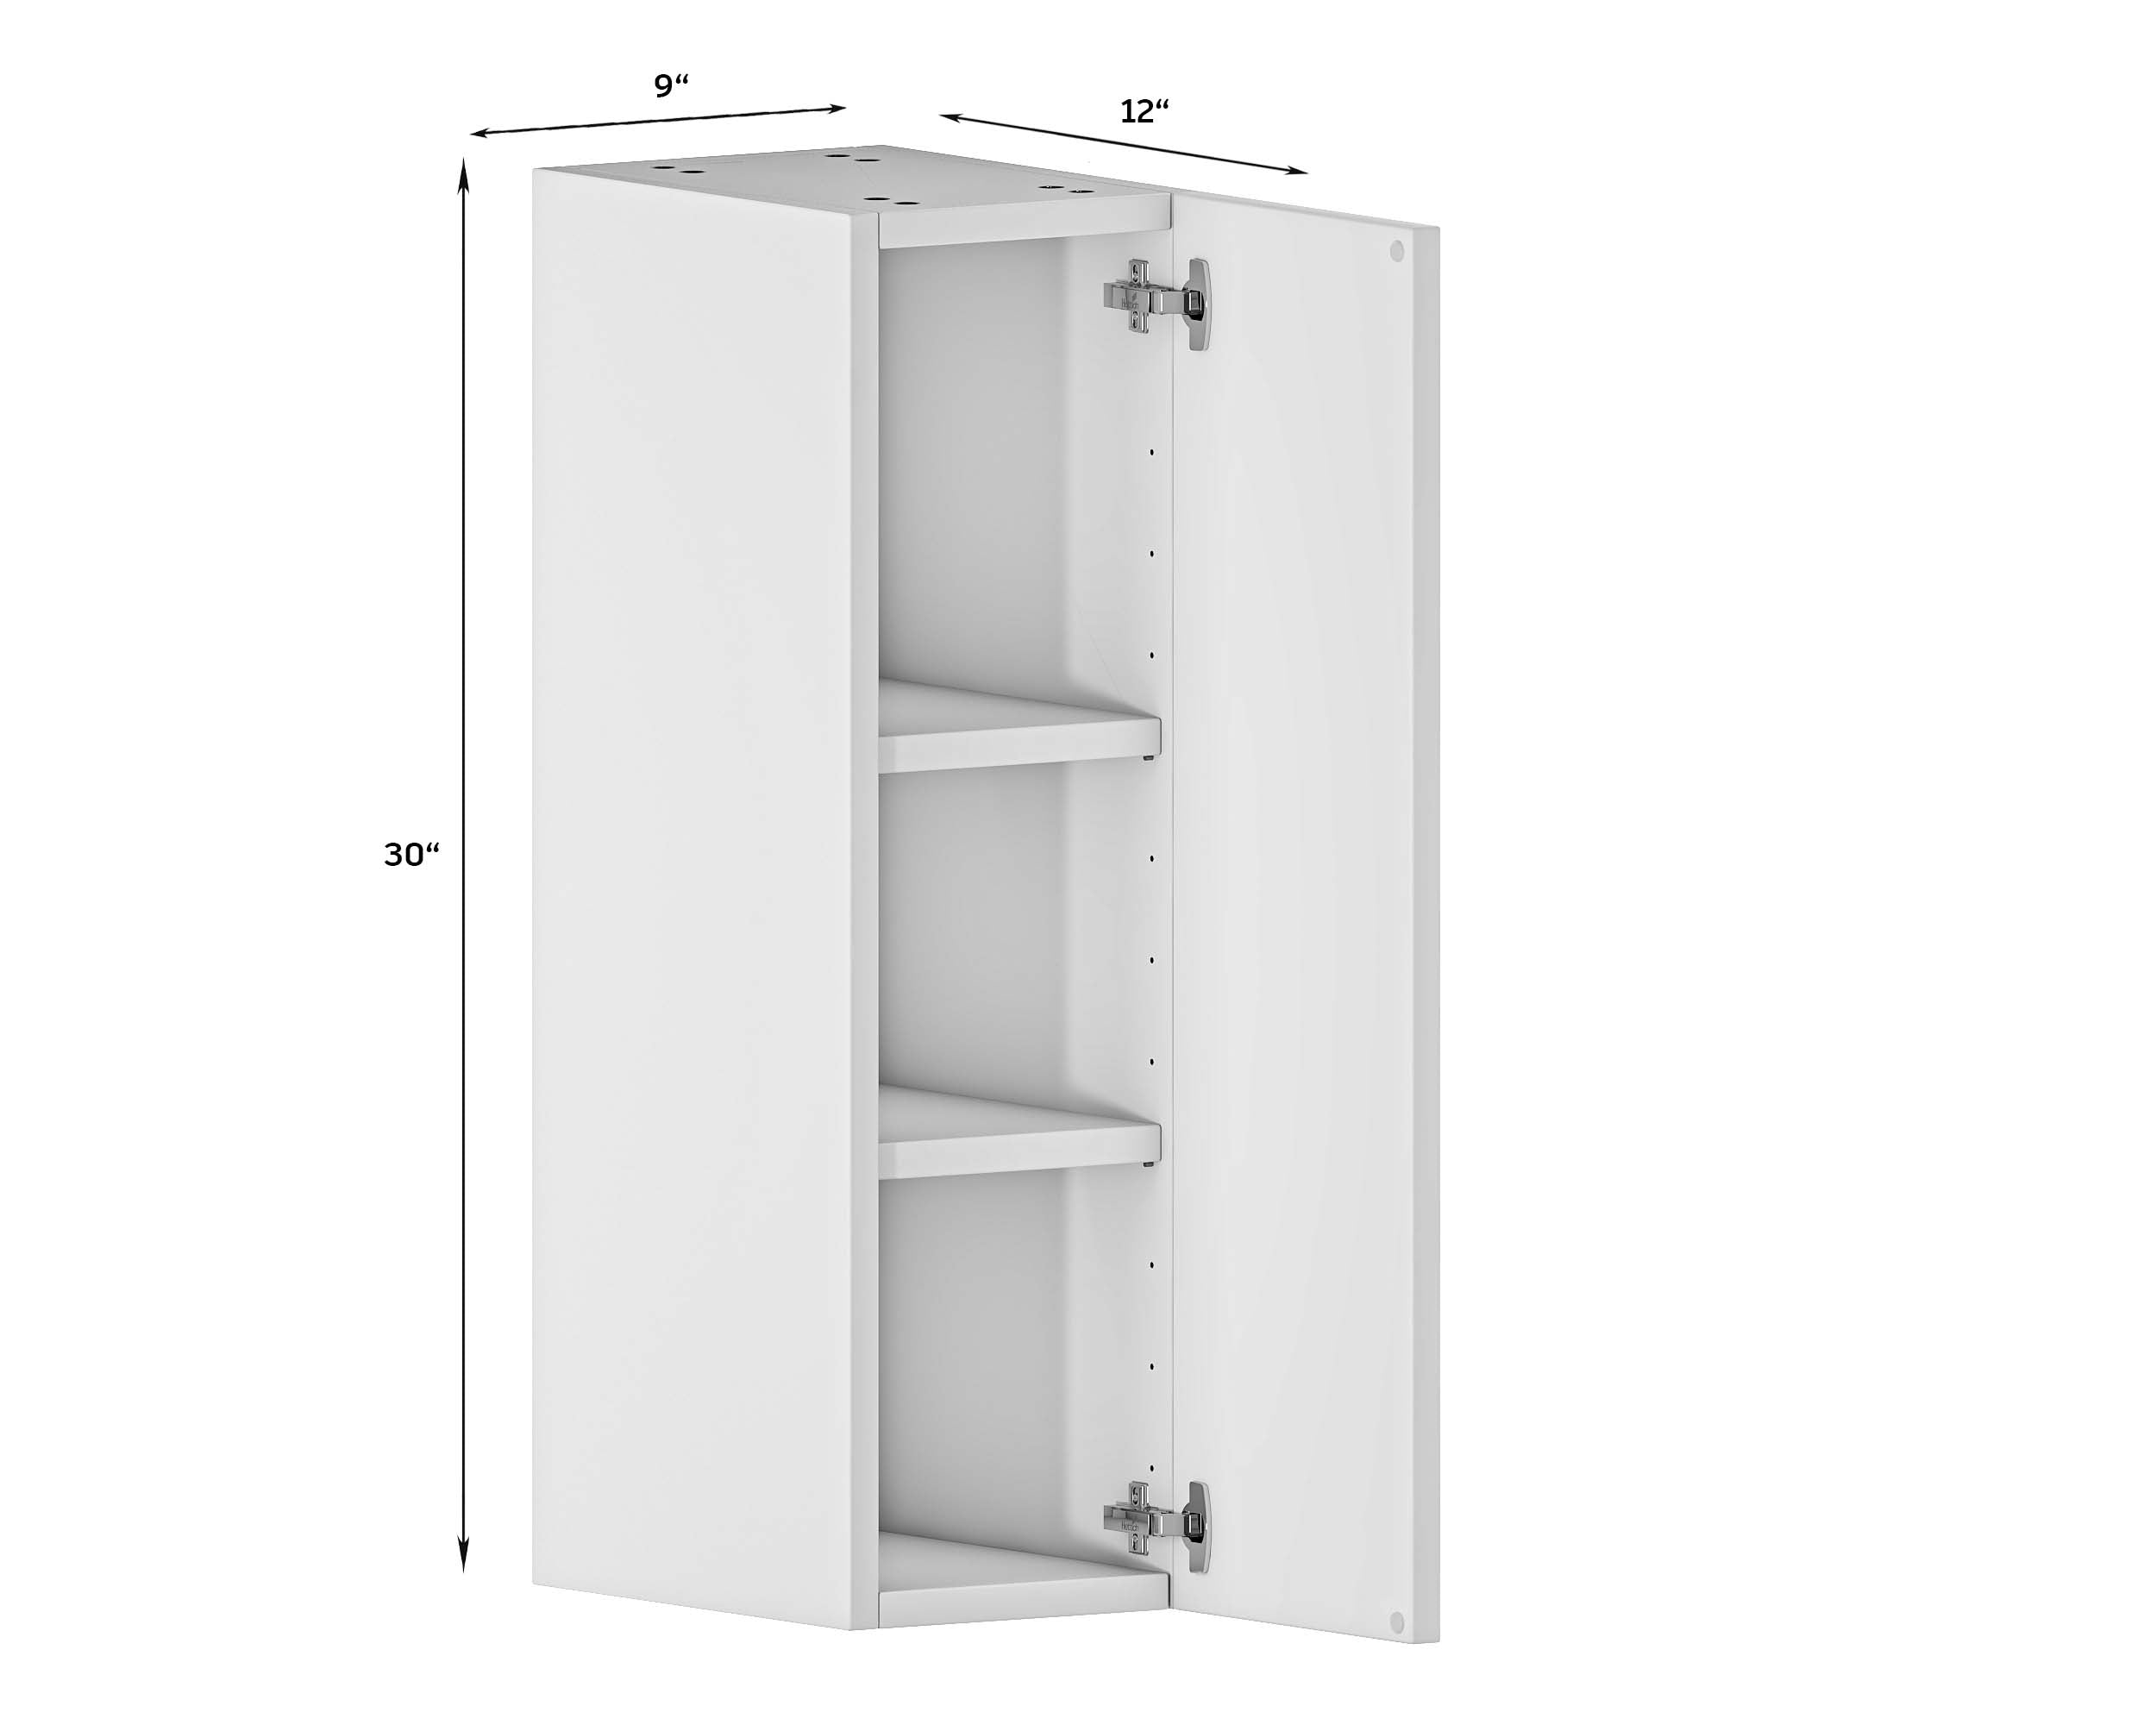 Quick Assemble Modern Style with Soft Close, 9 in White Shaker Wall Kitchen Cabinet (9 in W x 12 D x 30 in H) -  Pro-Edge HD